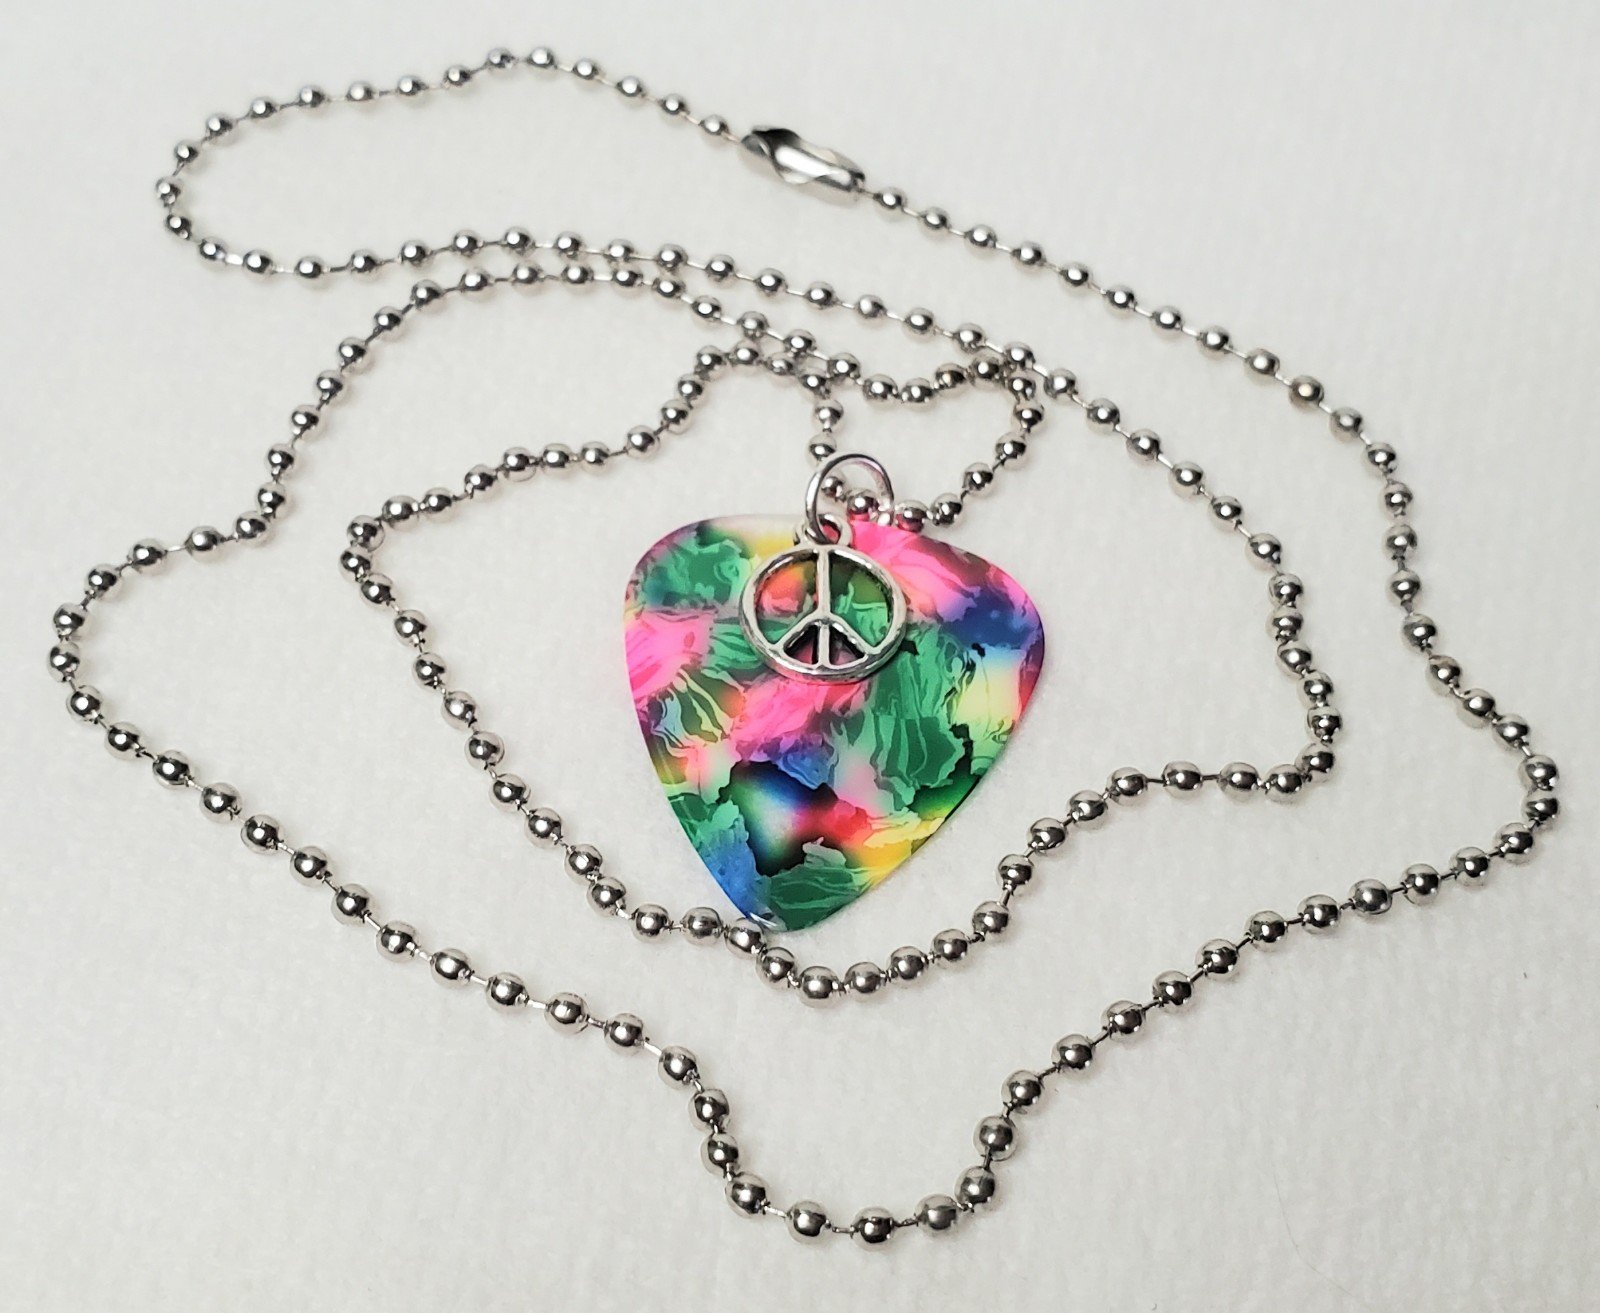 Tie Dye Rainbow Psychedelic Peace Sign Guitar Pick Pendant Necklace 24